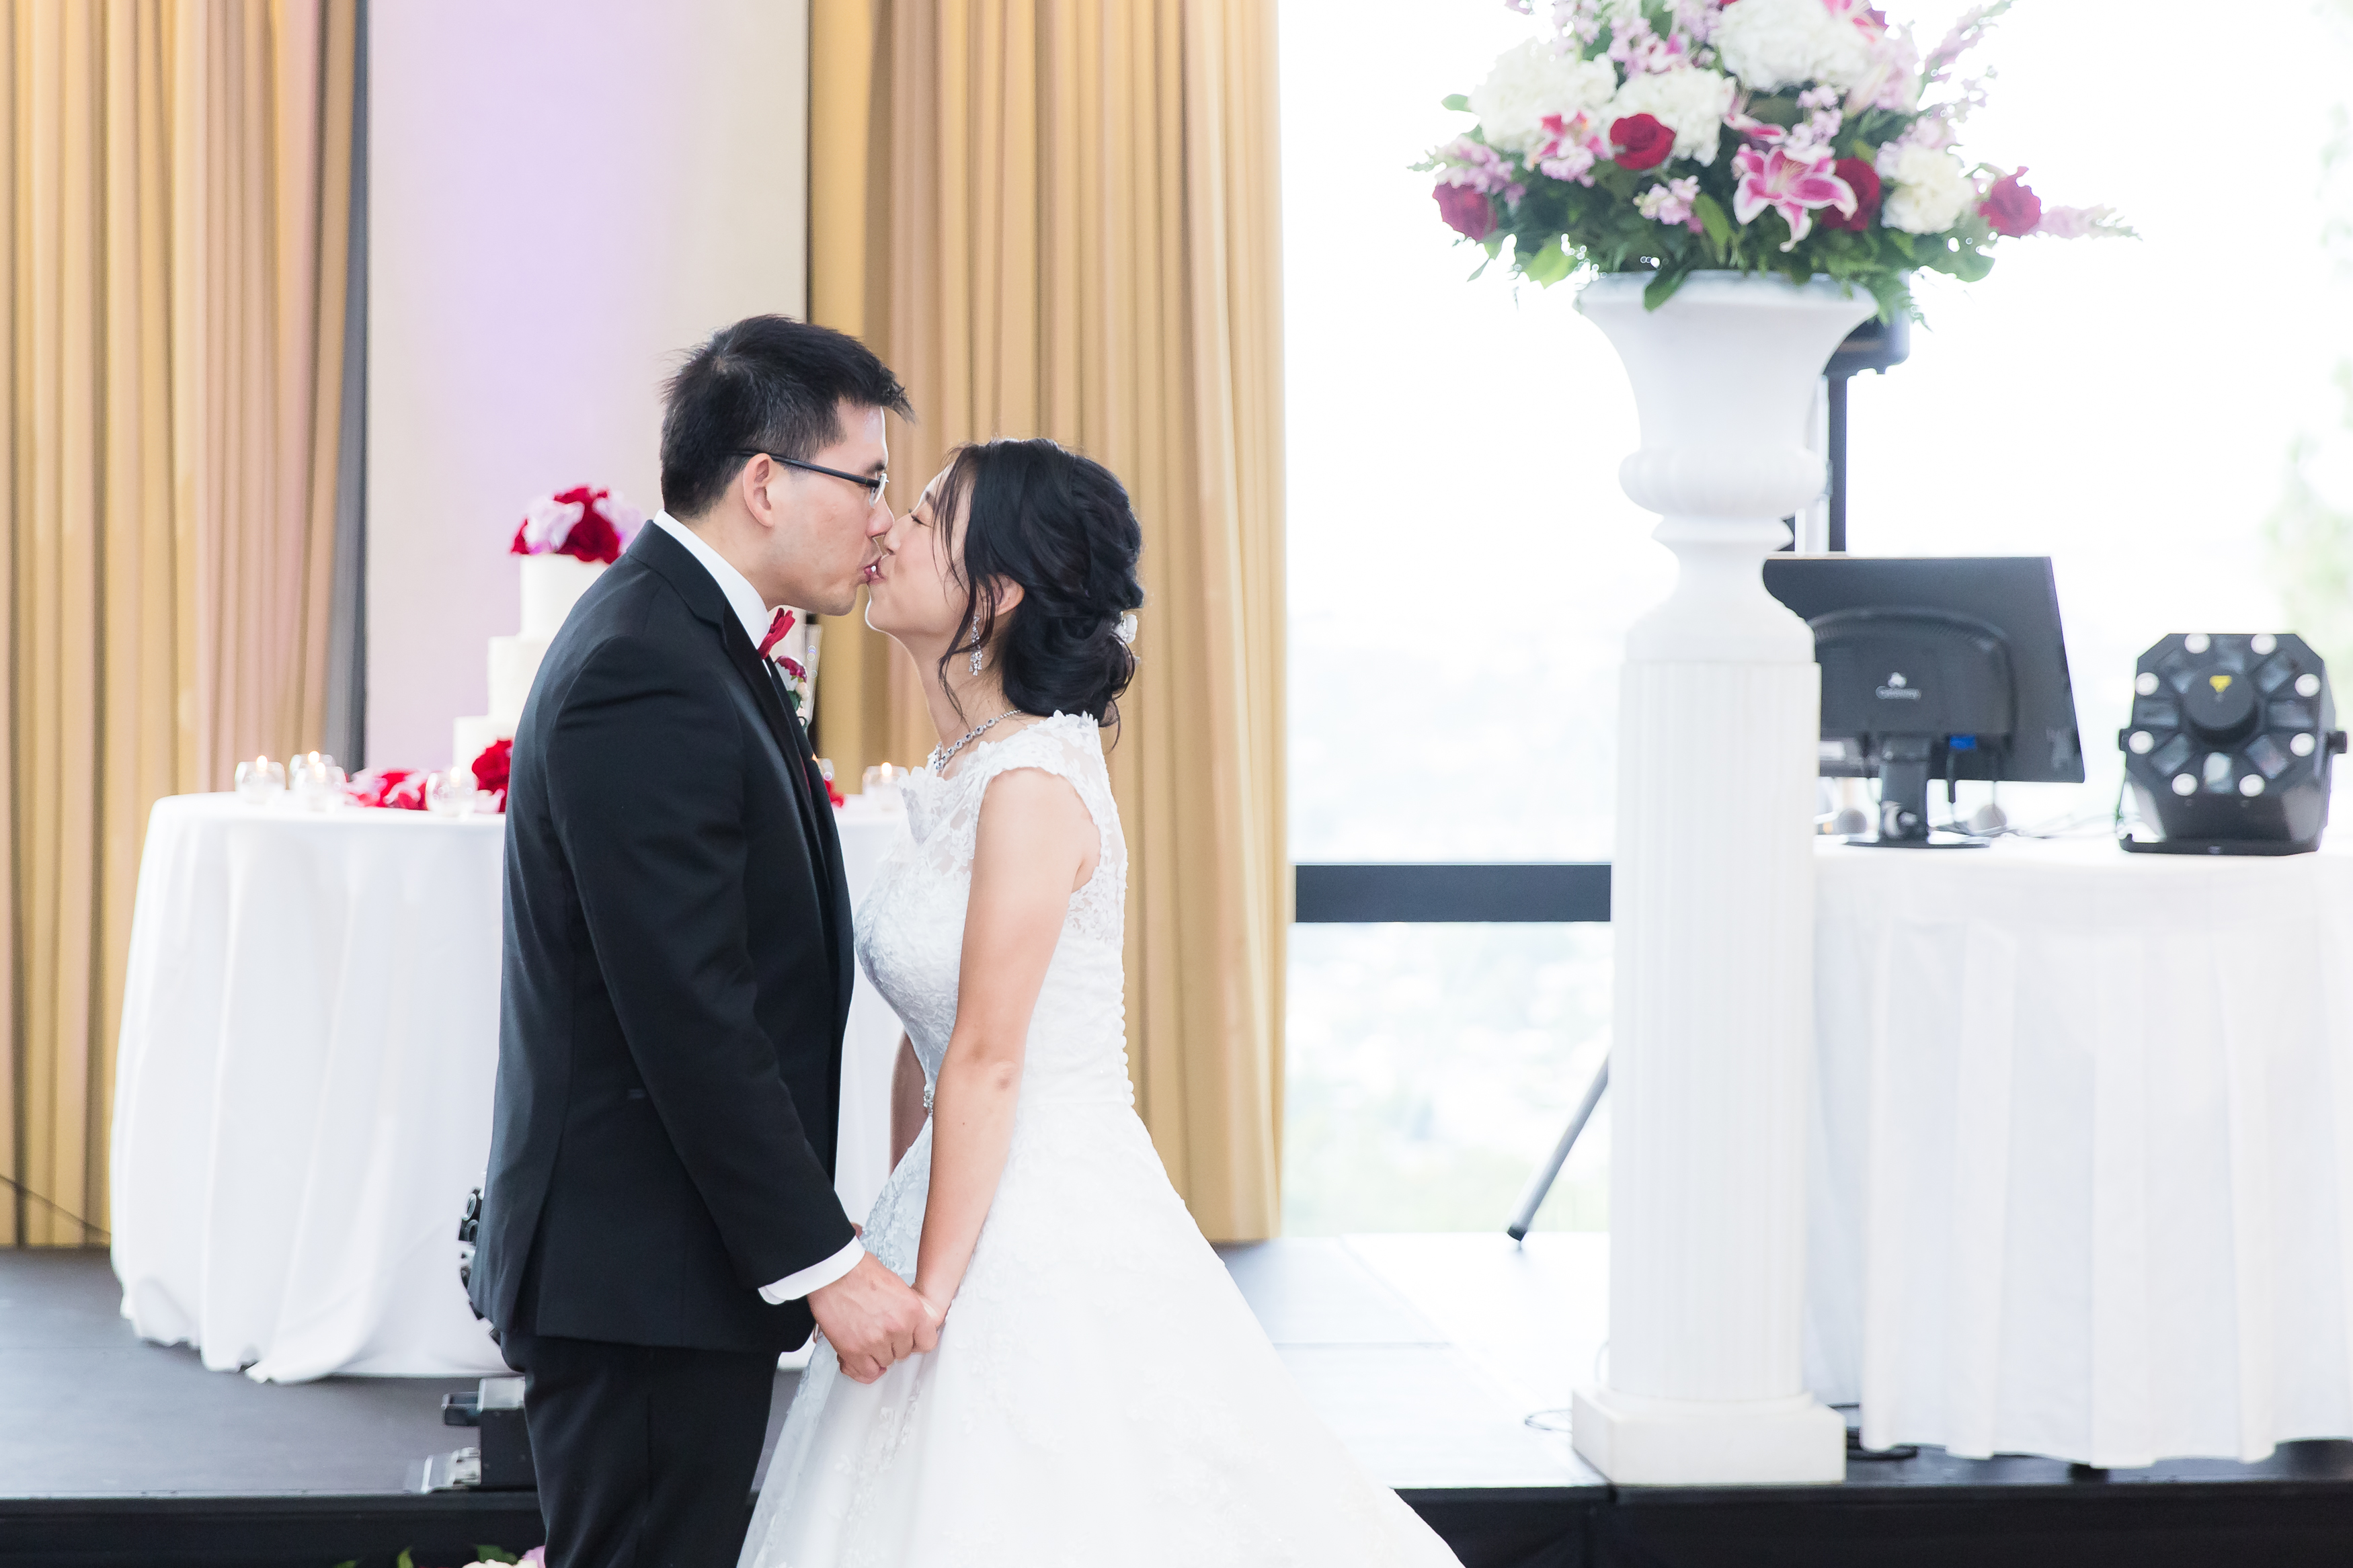 Husband and wife kiss after first dance during wedding reception